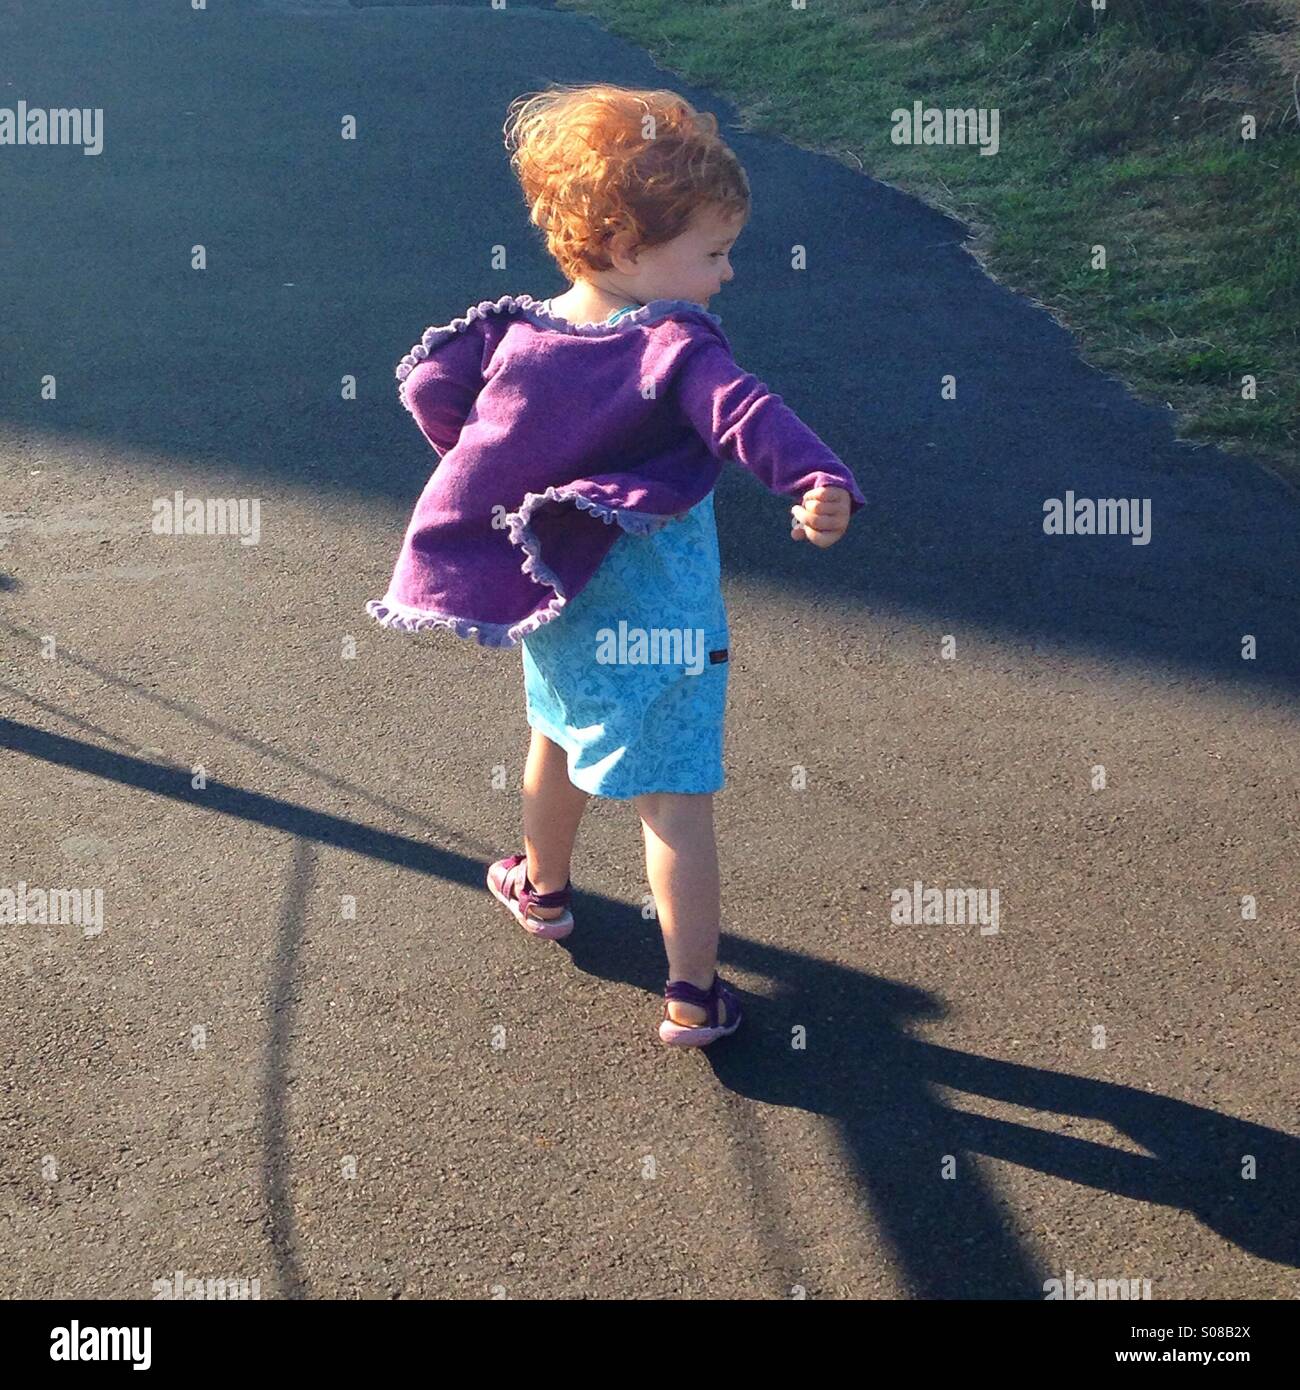 Red haired little girl skipping, Oregon coast Stock Photo